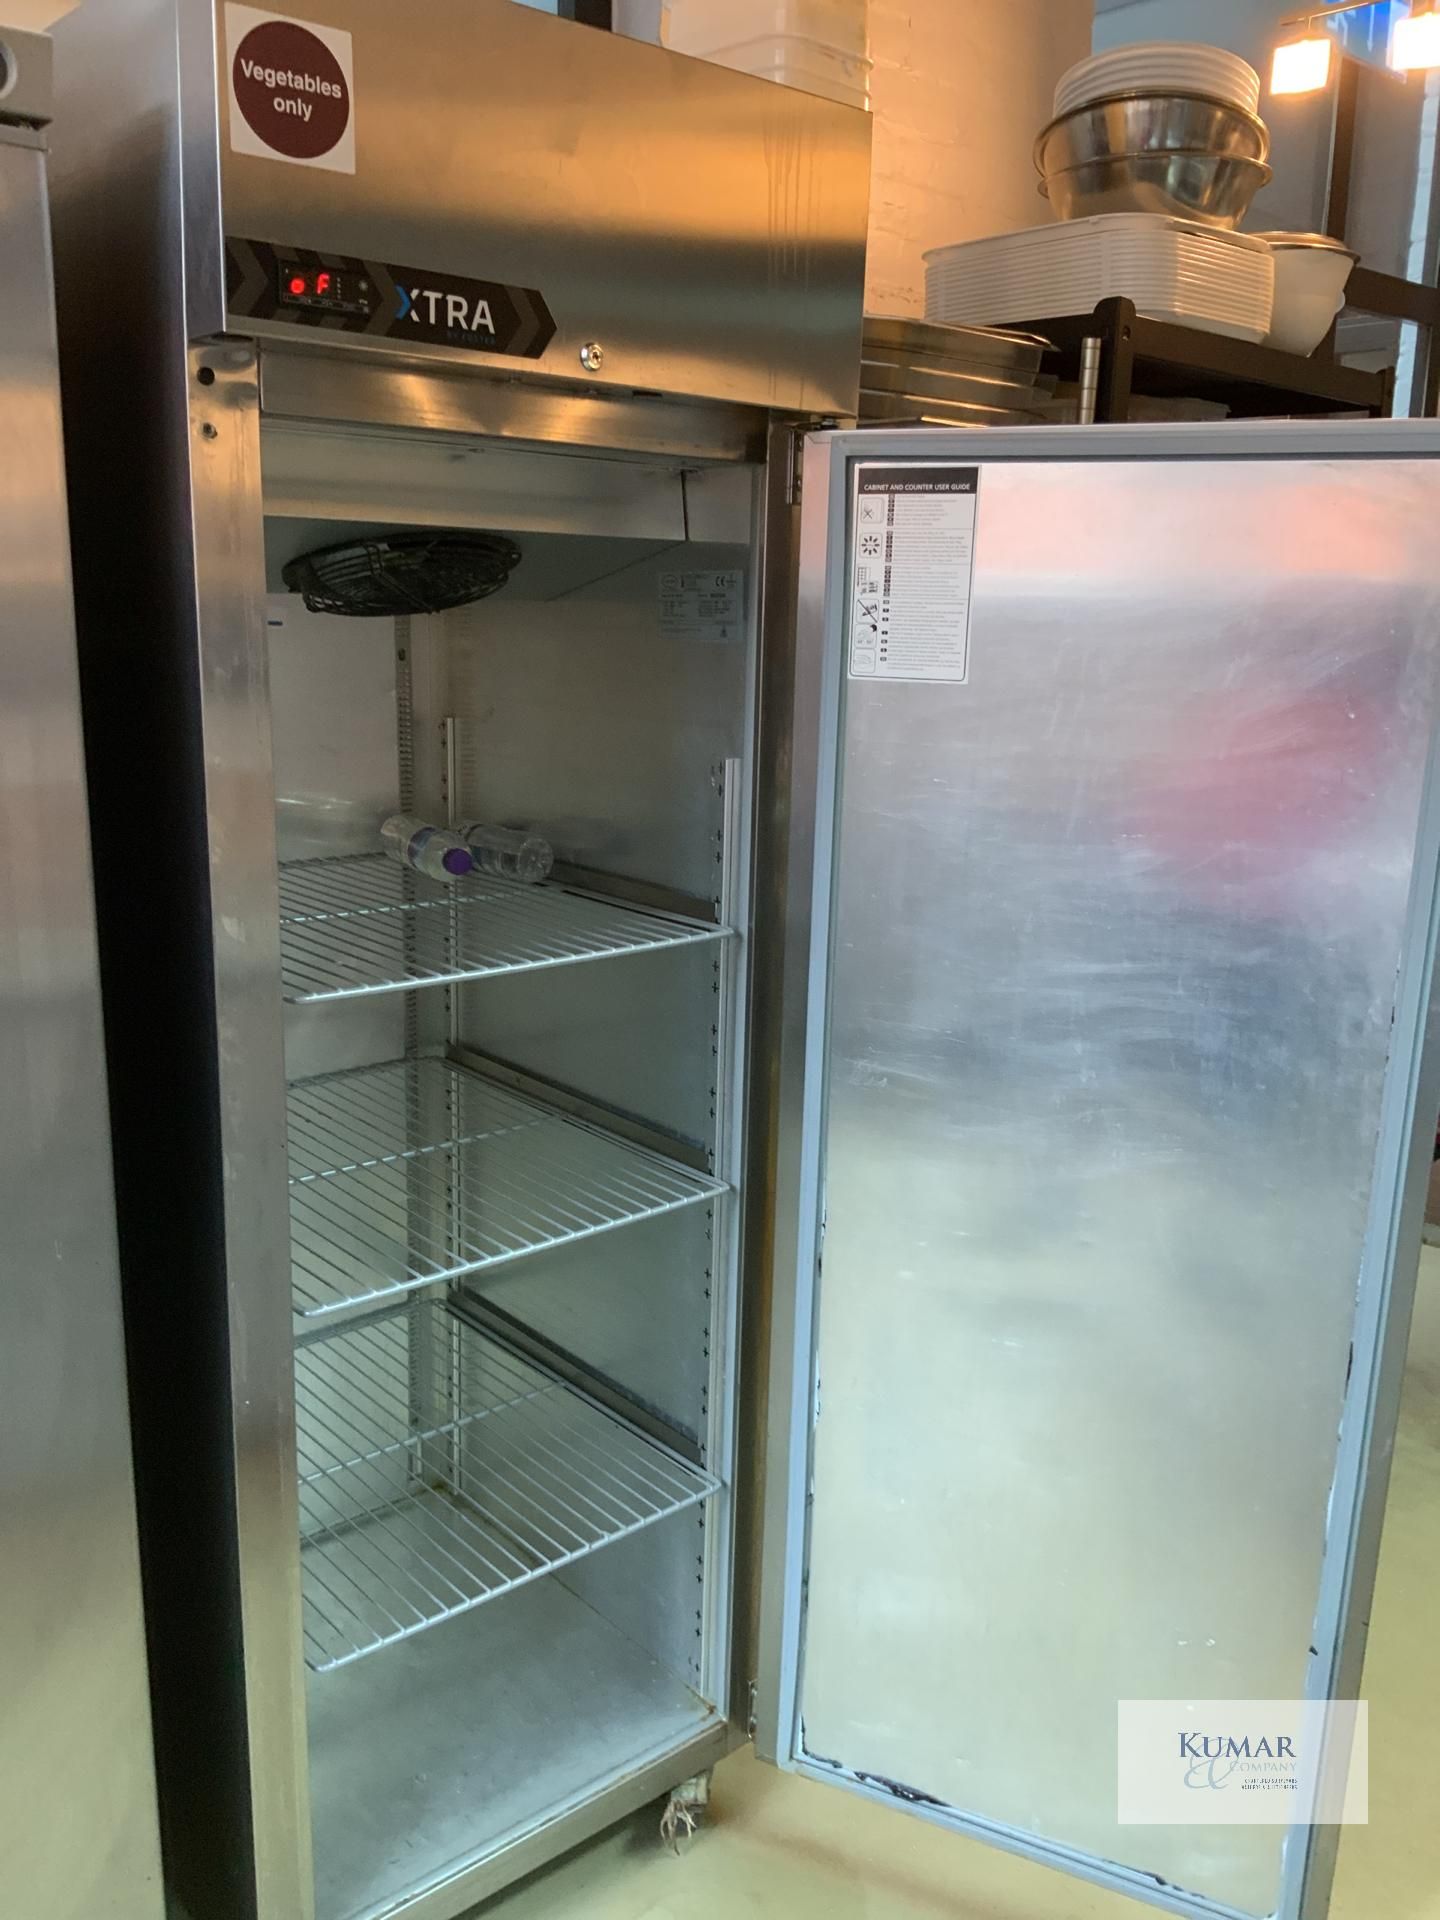 Foster Xtra Stainless Steel Upright Refrigerator. Please Note - This lot is located at Hengata - Image 3 of 5